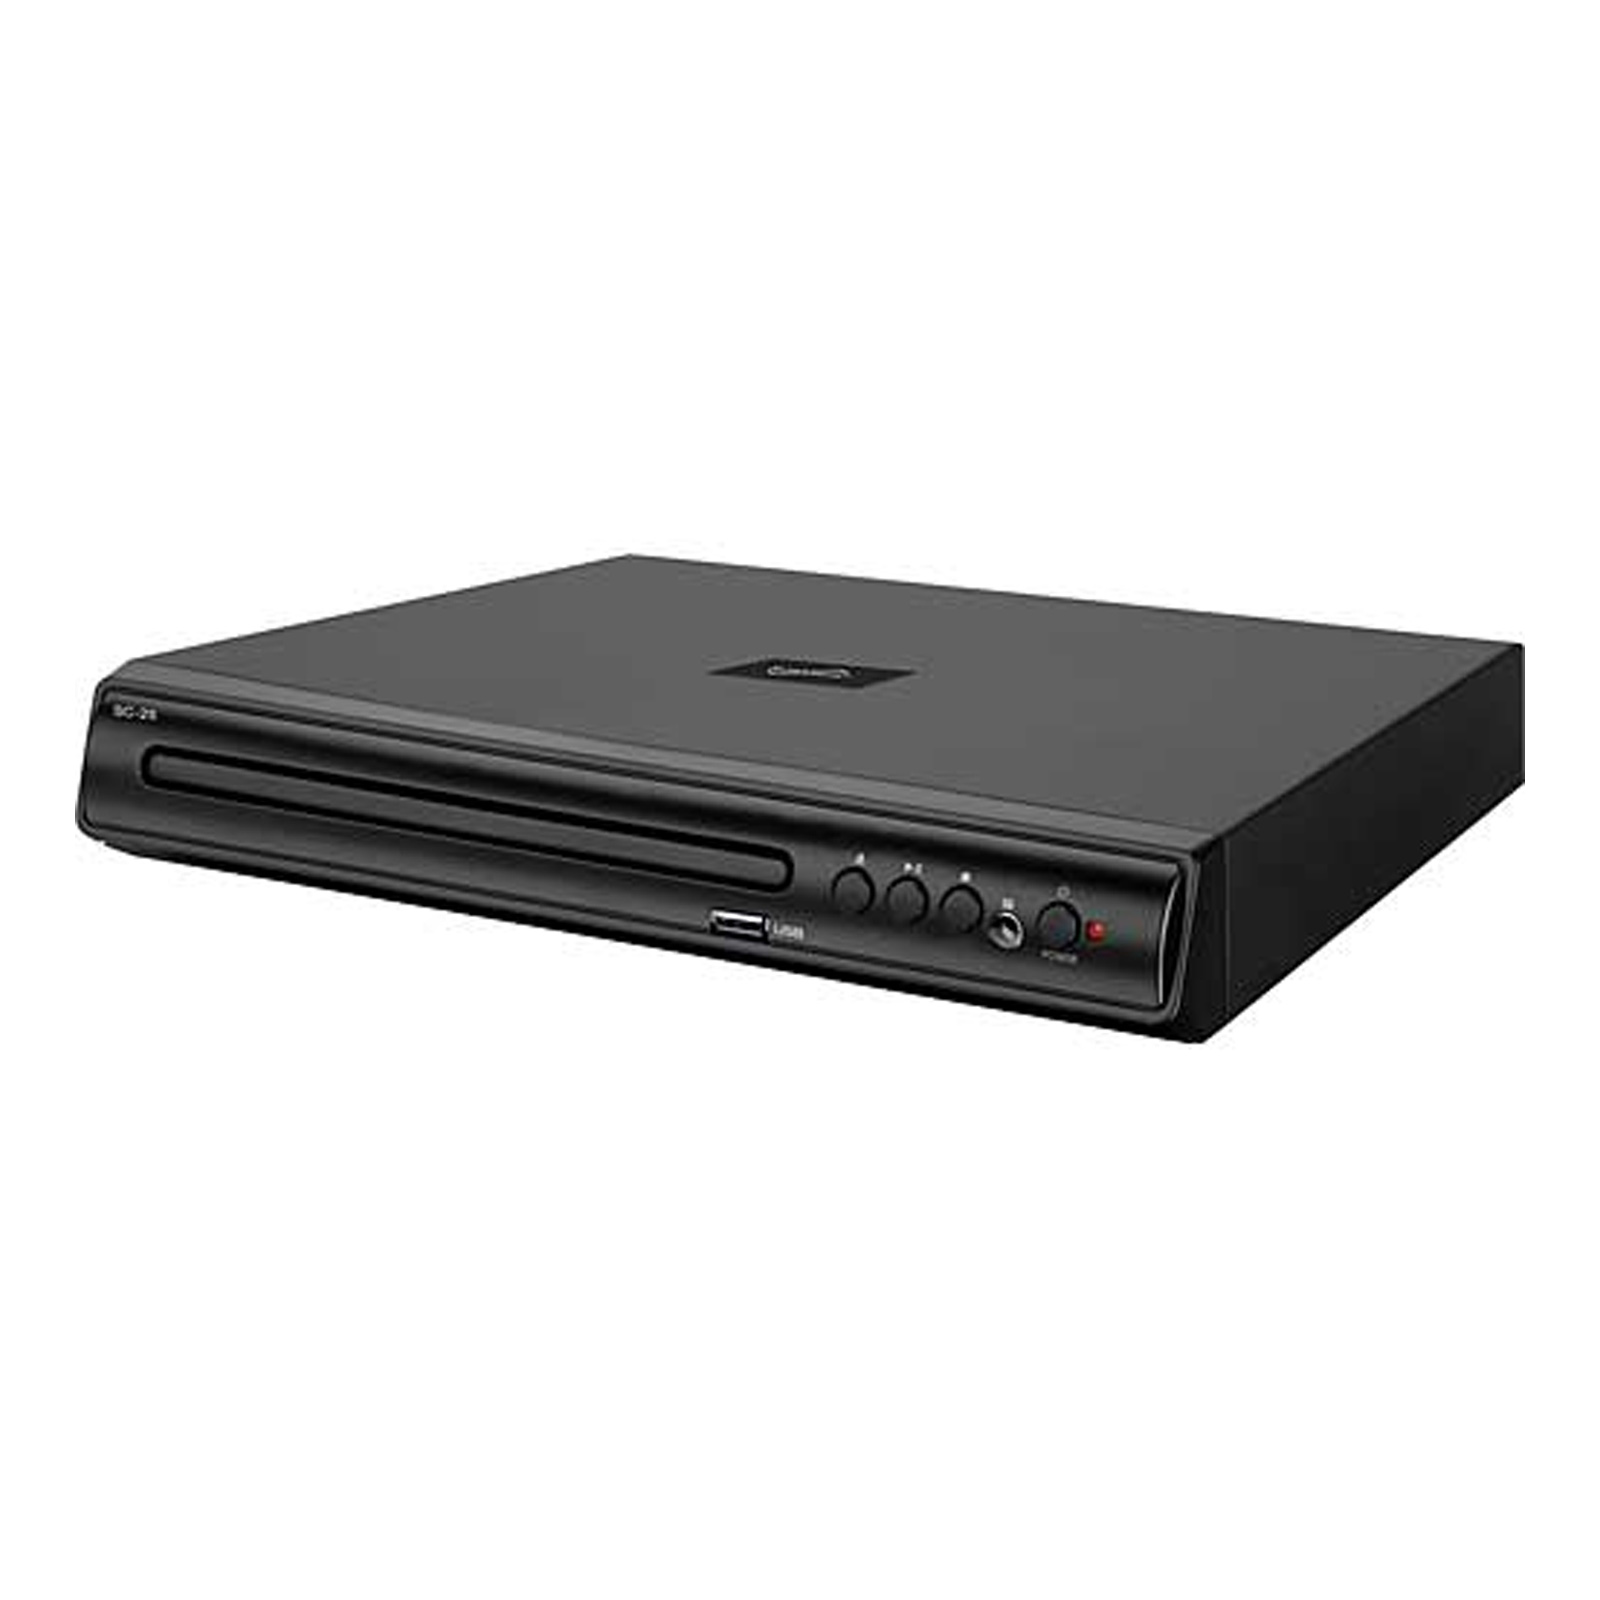 Supersonic PAL/NTSC DVD Player with USB - image 1 of 1